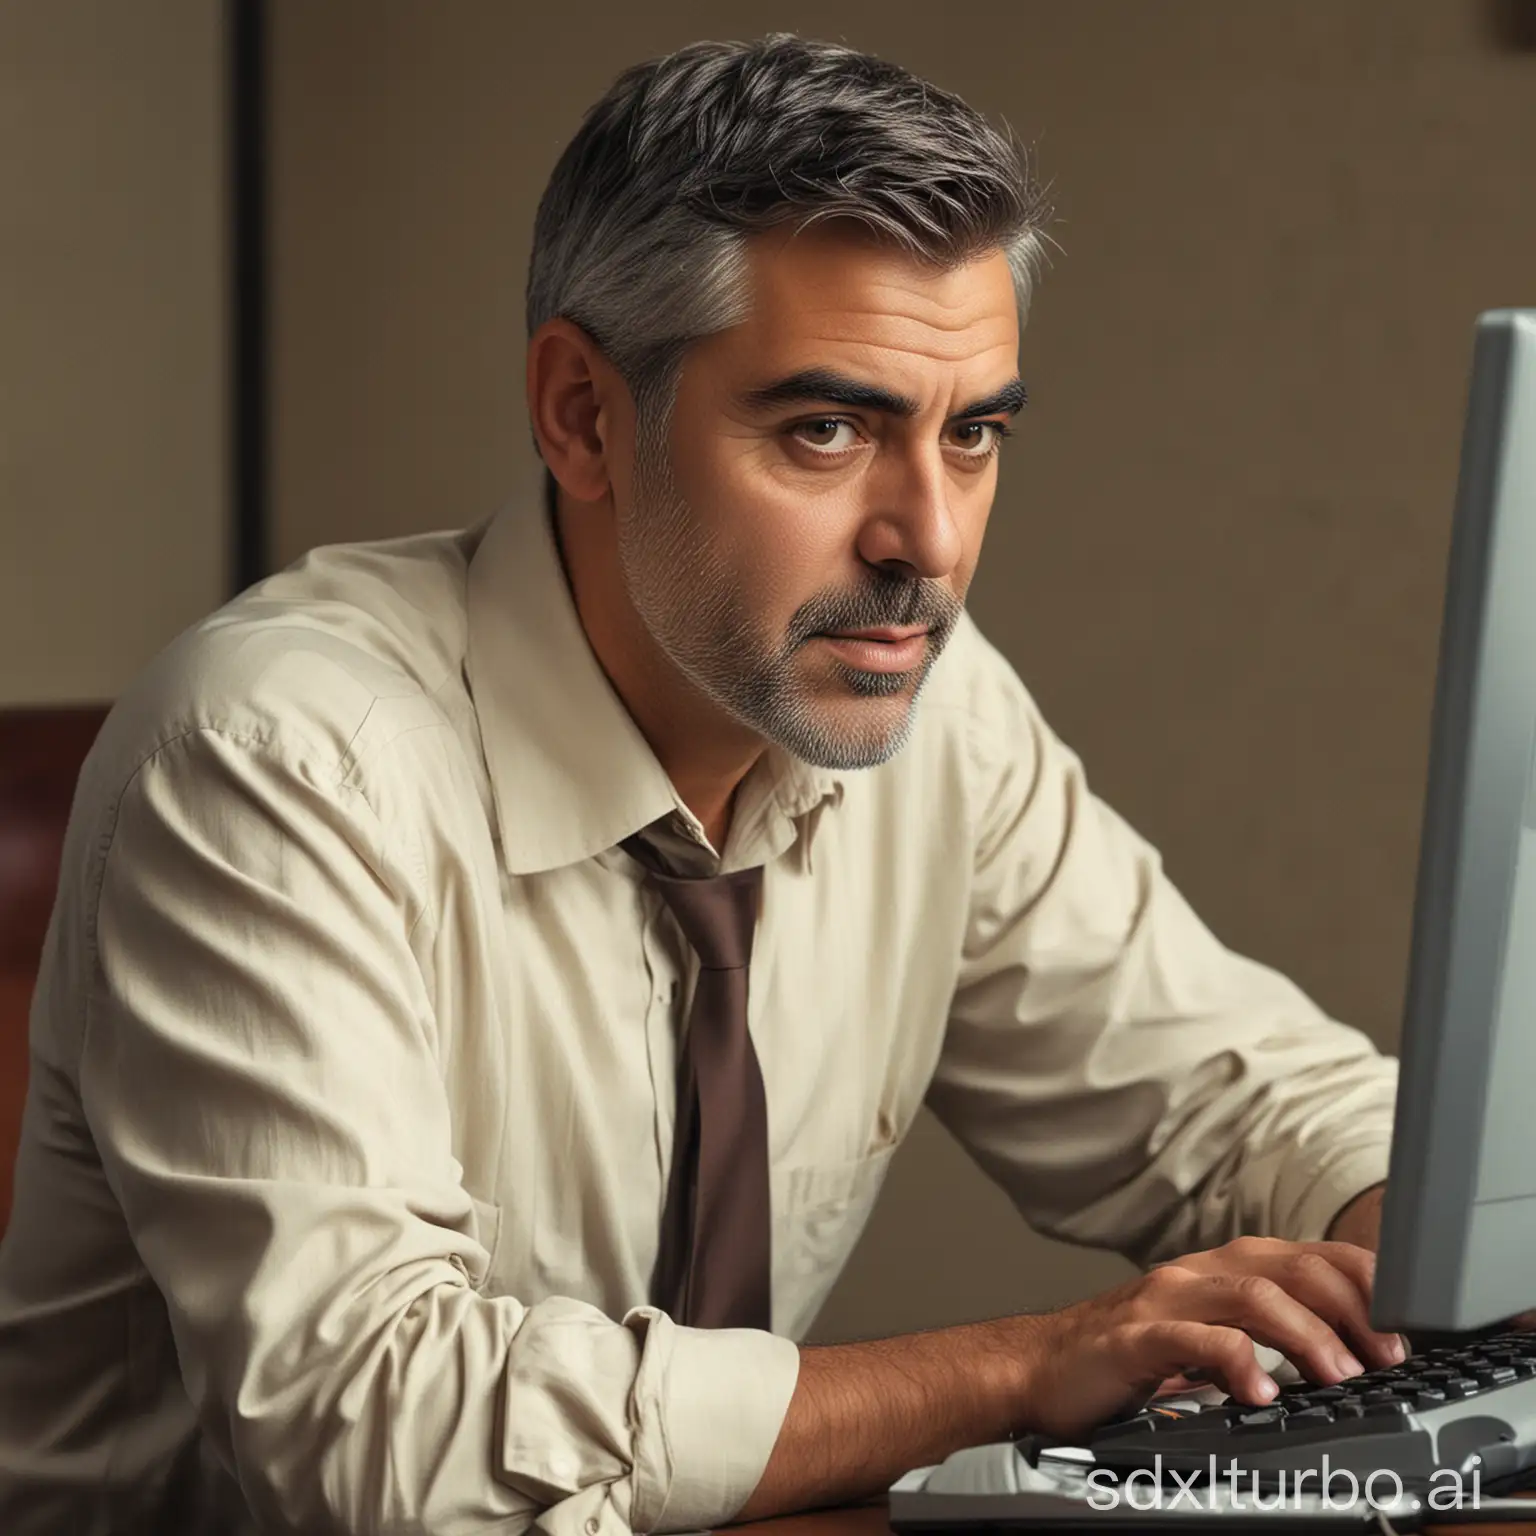 George-Clooney-Lookalike-Typing-Intensely-on-Computer